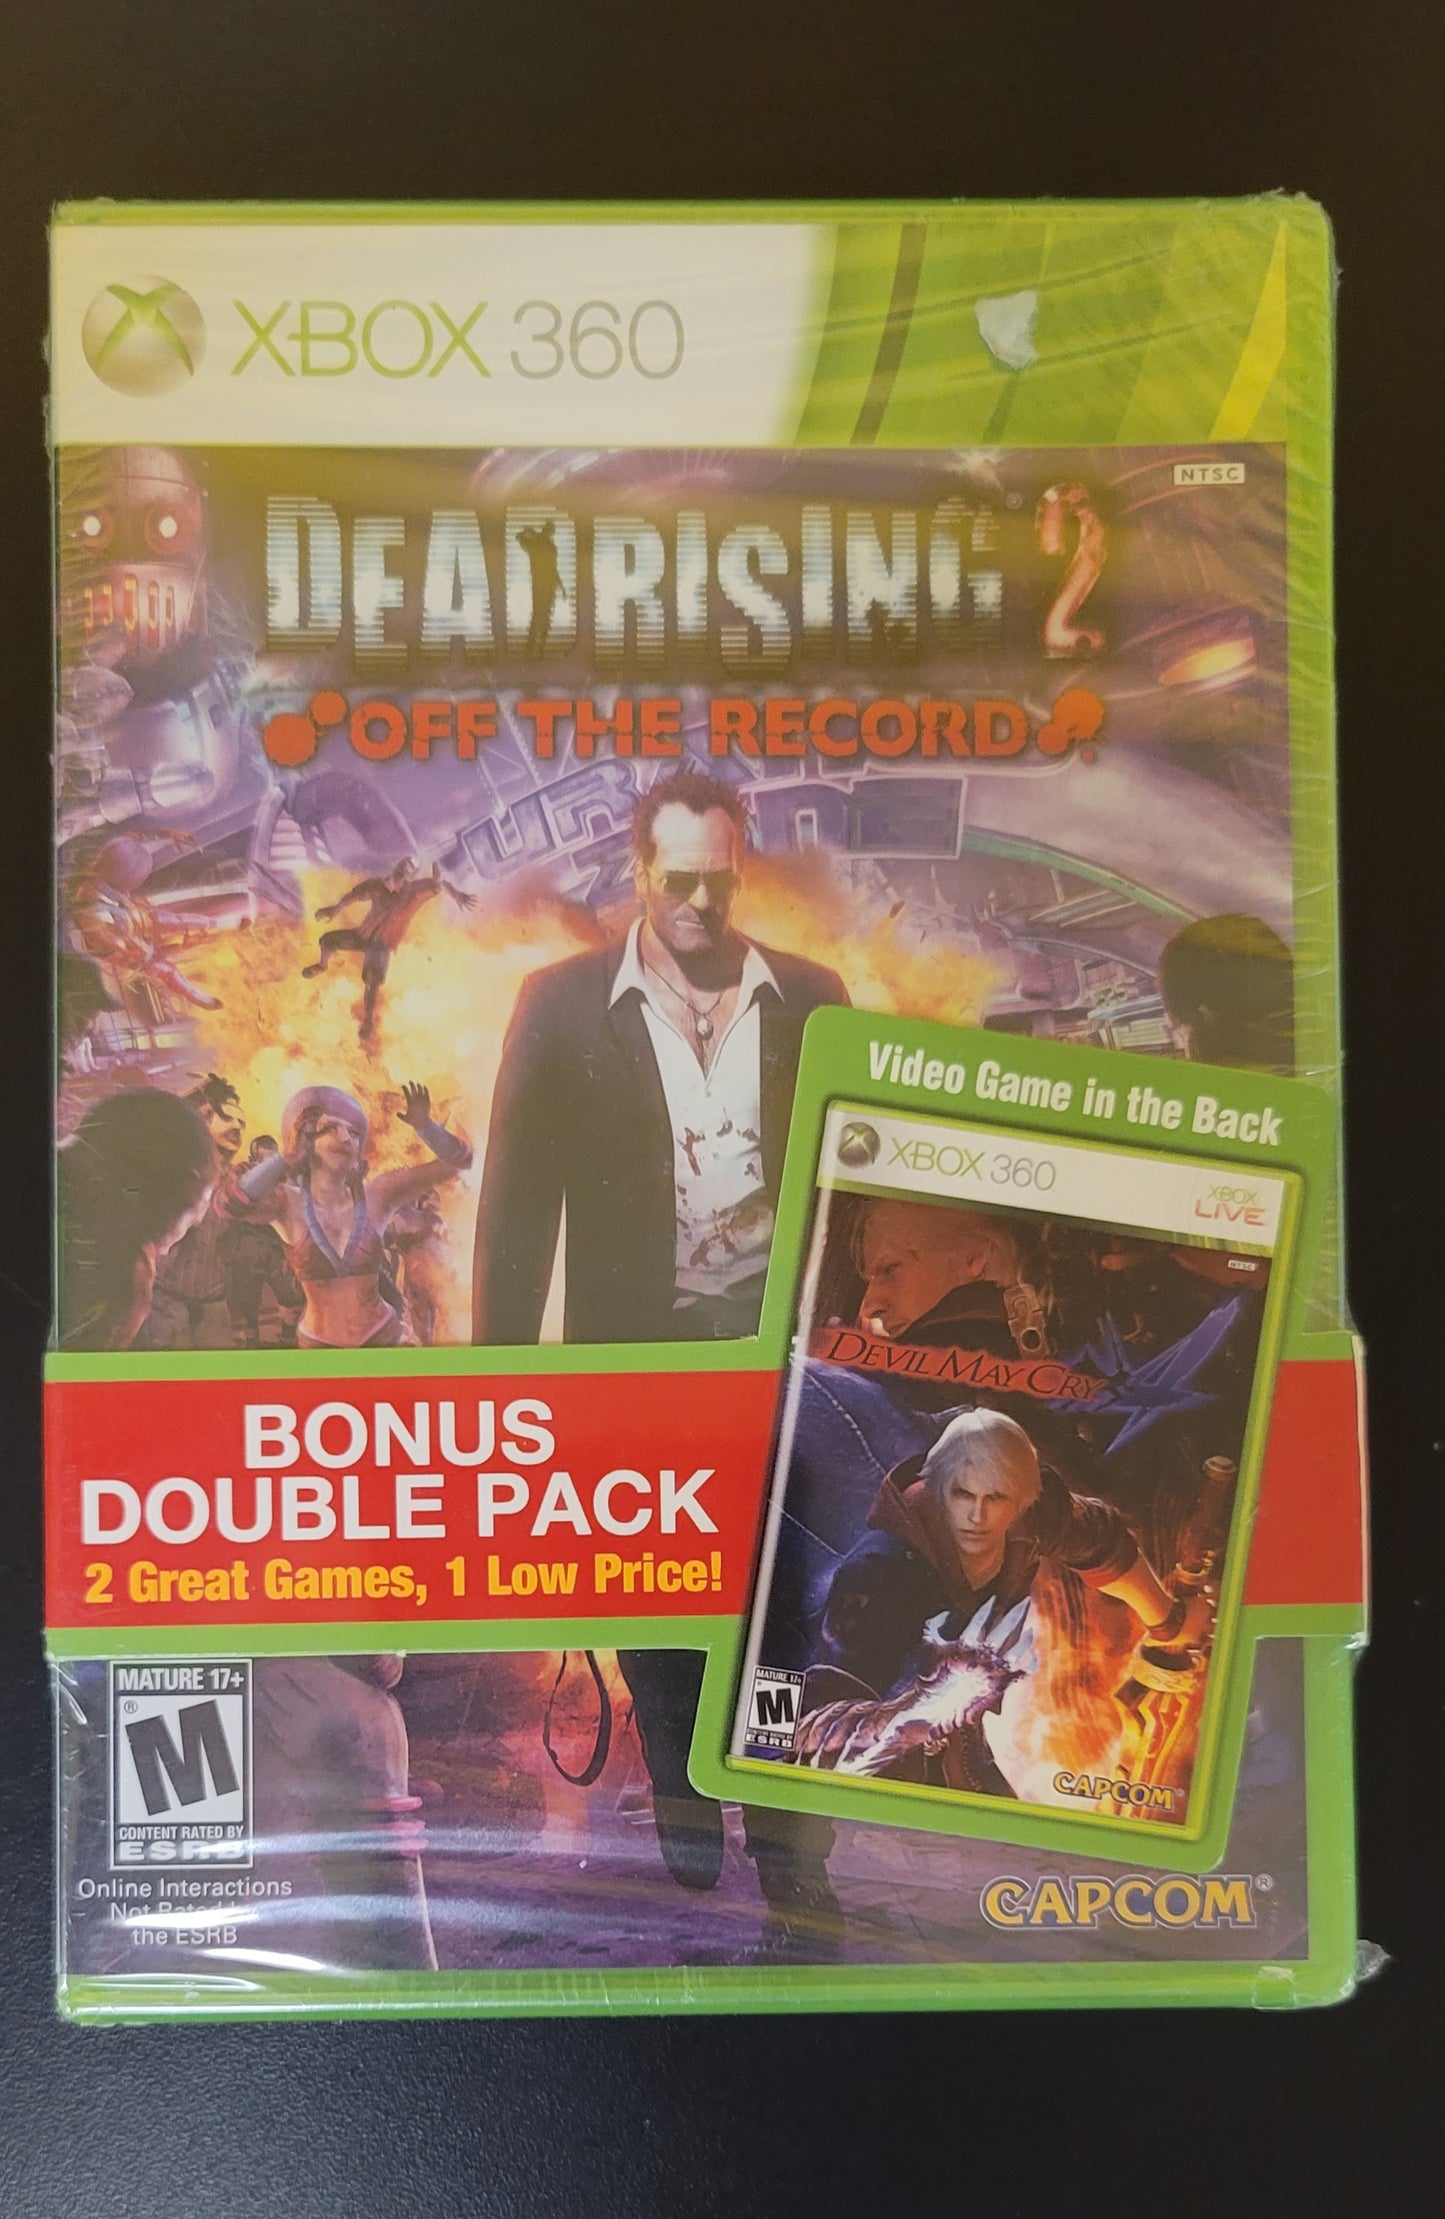 Dead Rising 2 Off the Record + Devil May Cry 4 - Xb360 - Sealed